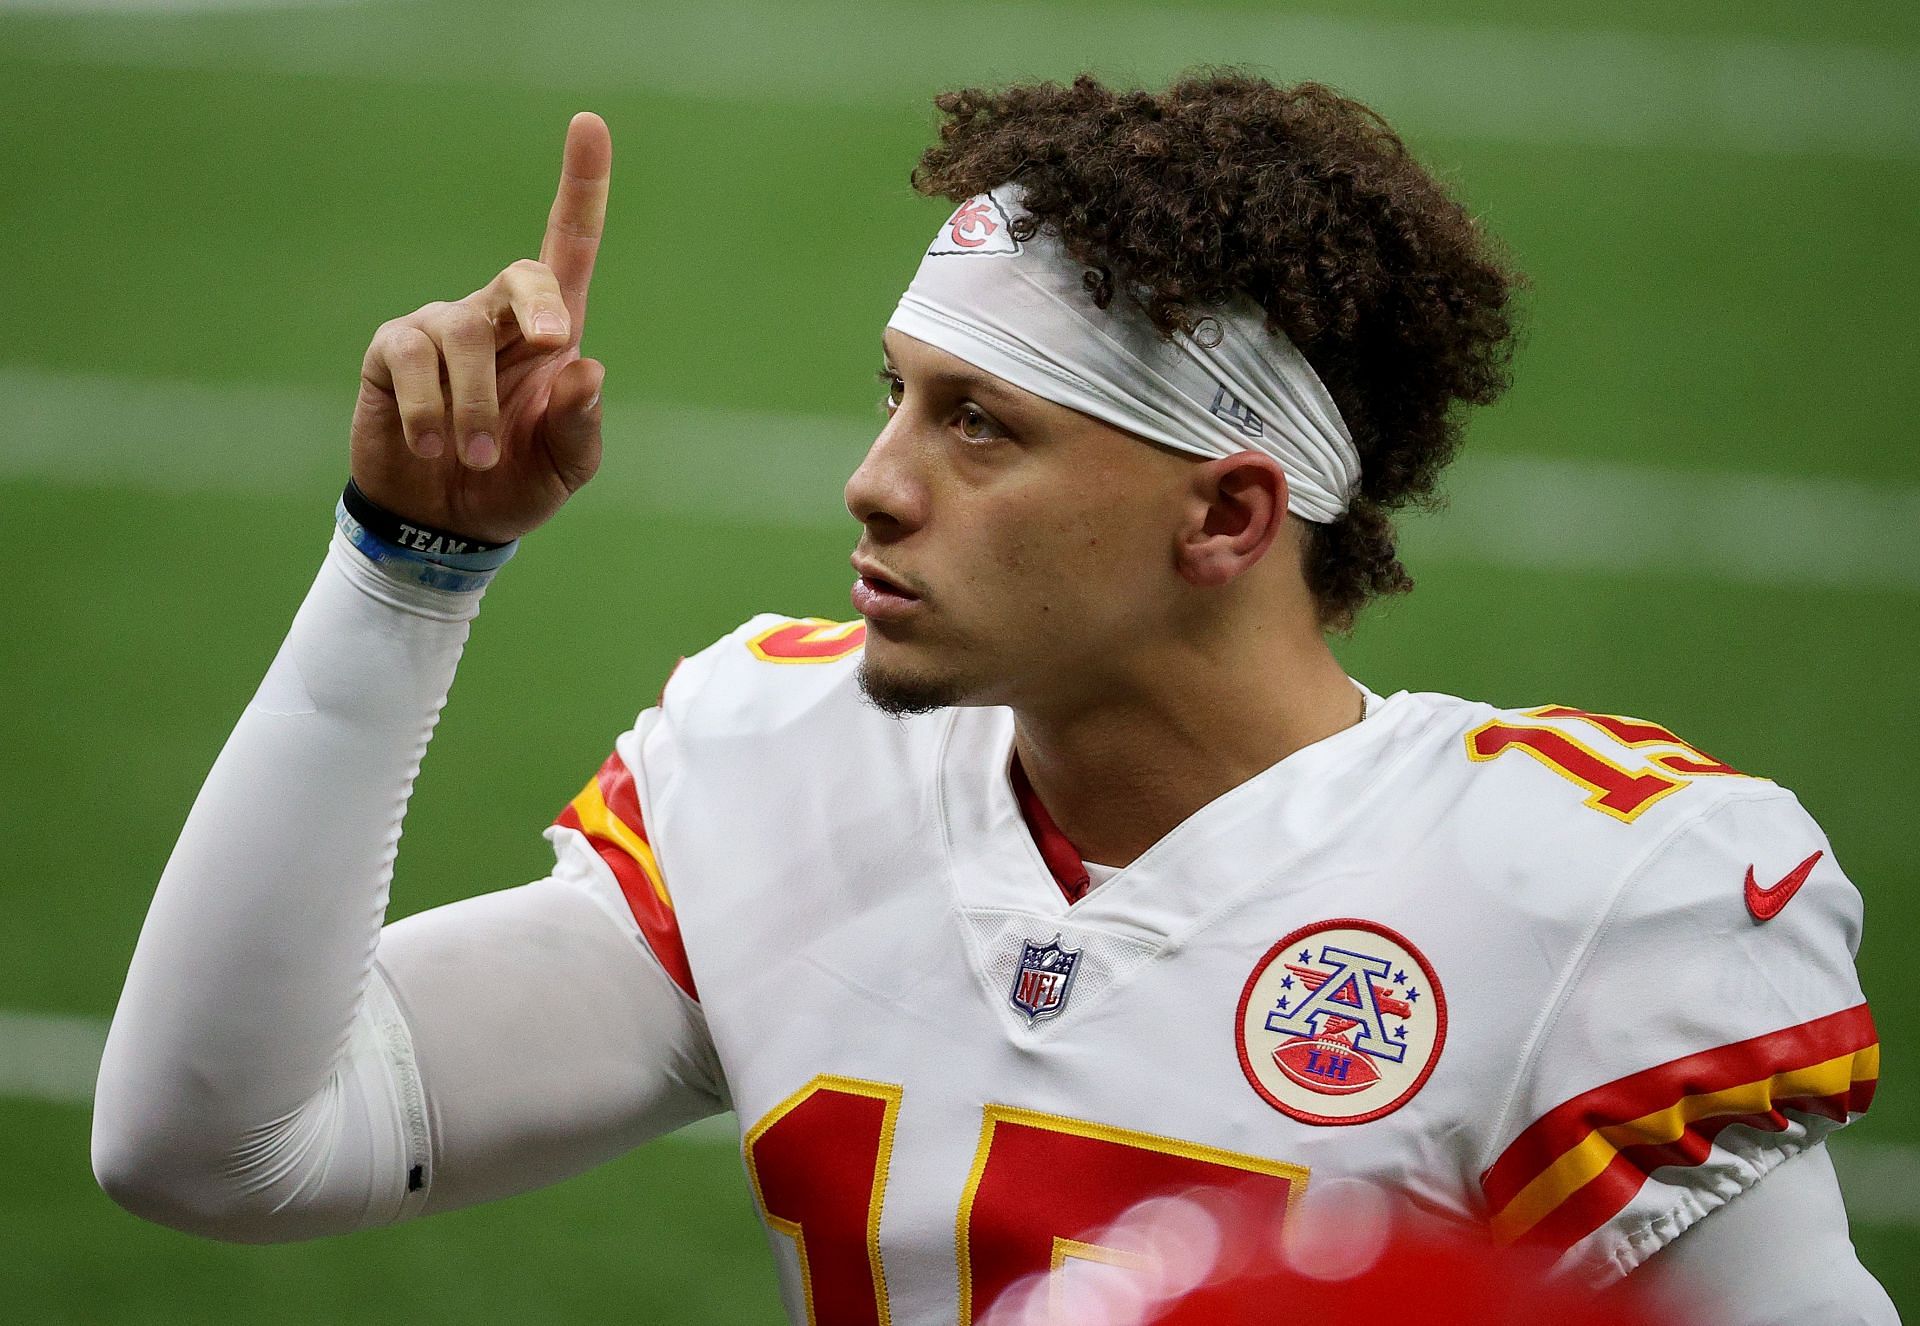 Kansas City Chiefs quaterback Patrick Mahomes is a star on and off the field